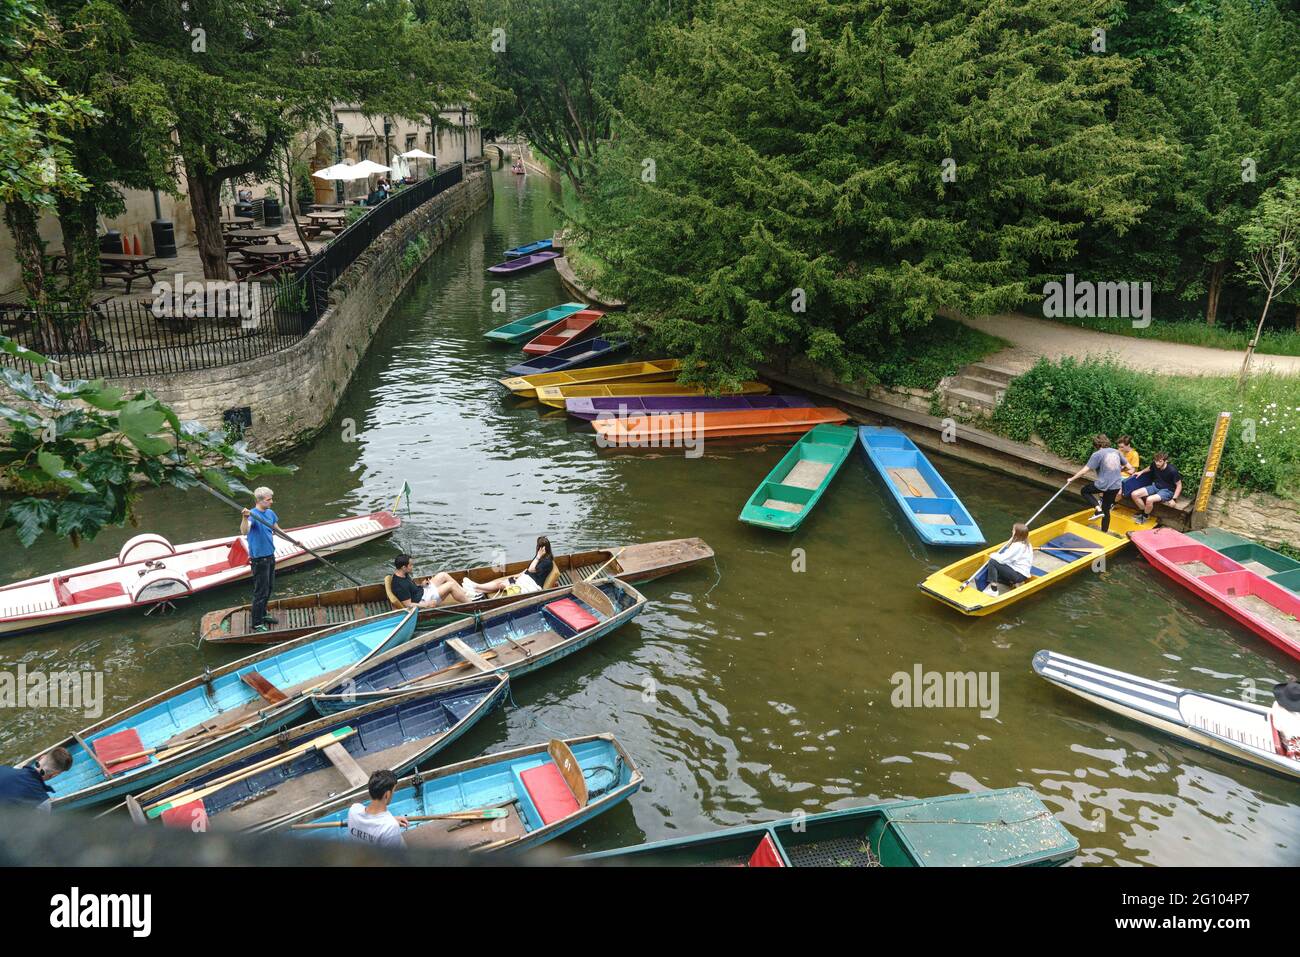 June 3rd: As restrictions on outdoor activities ease, punters take to the river on a sunny early summer afternoon. Lockdown easing. Stock Photo